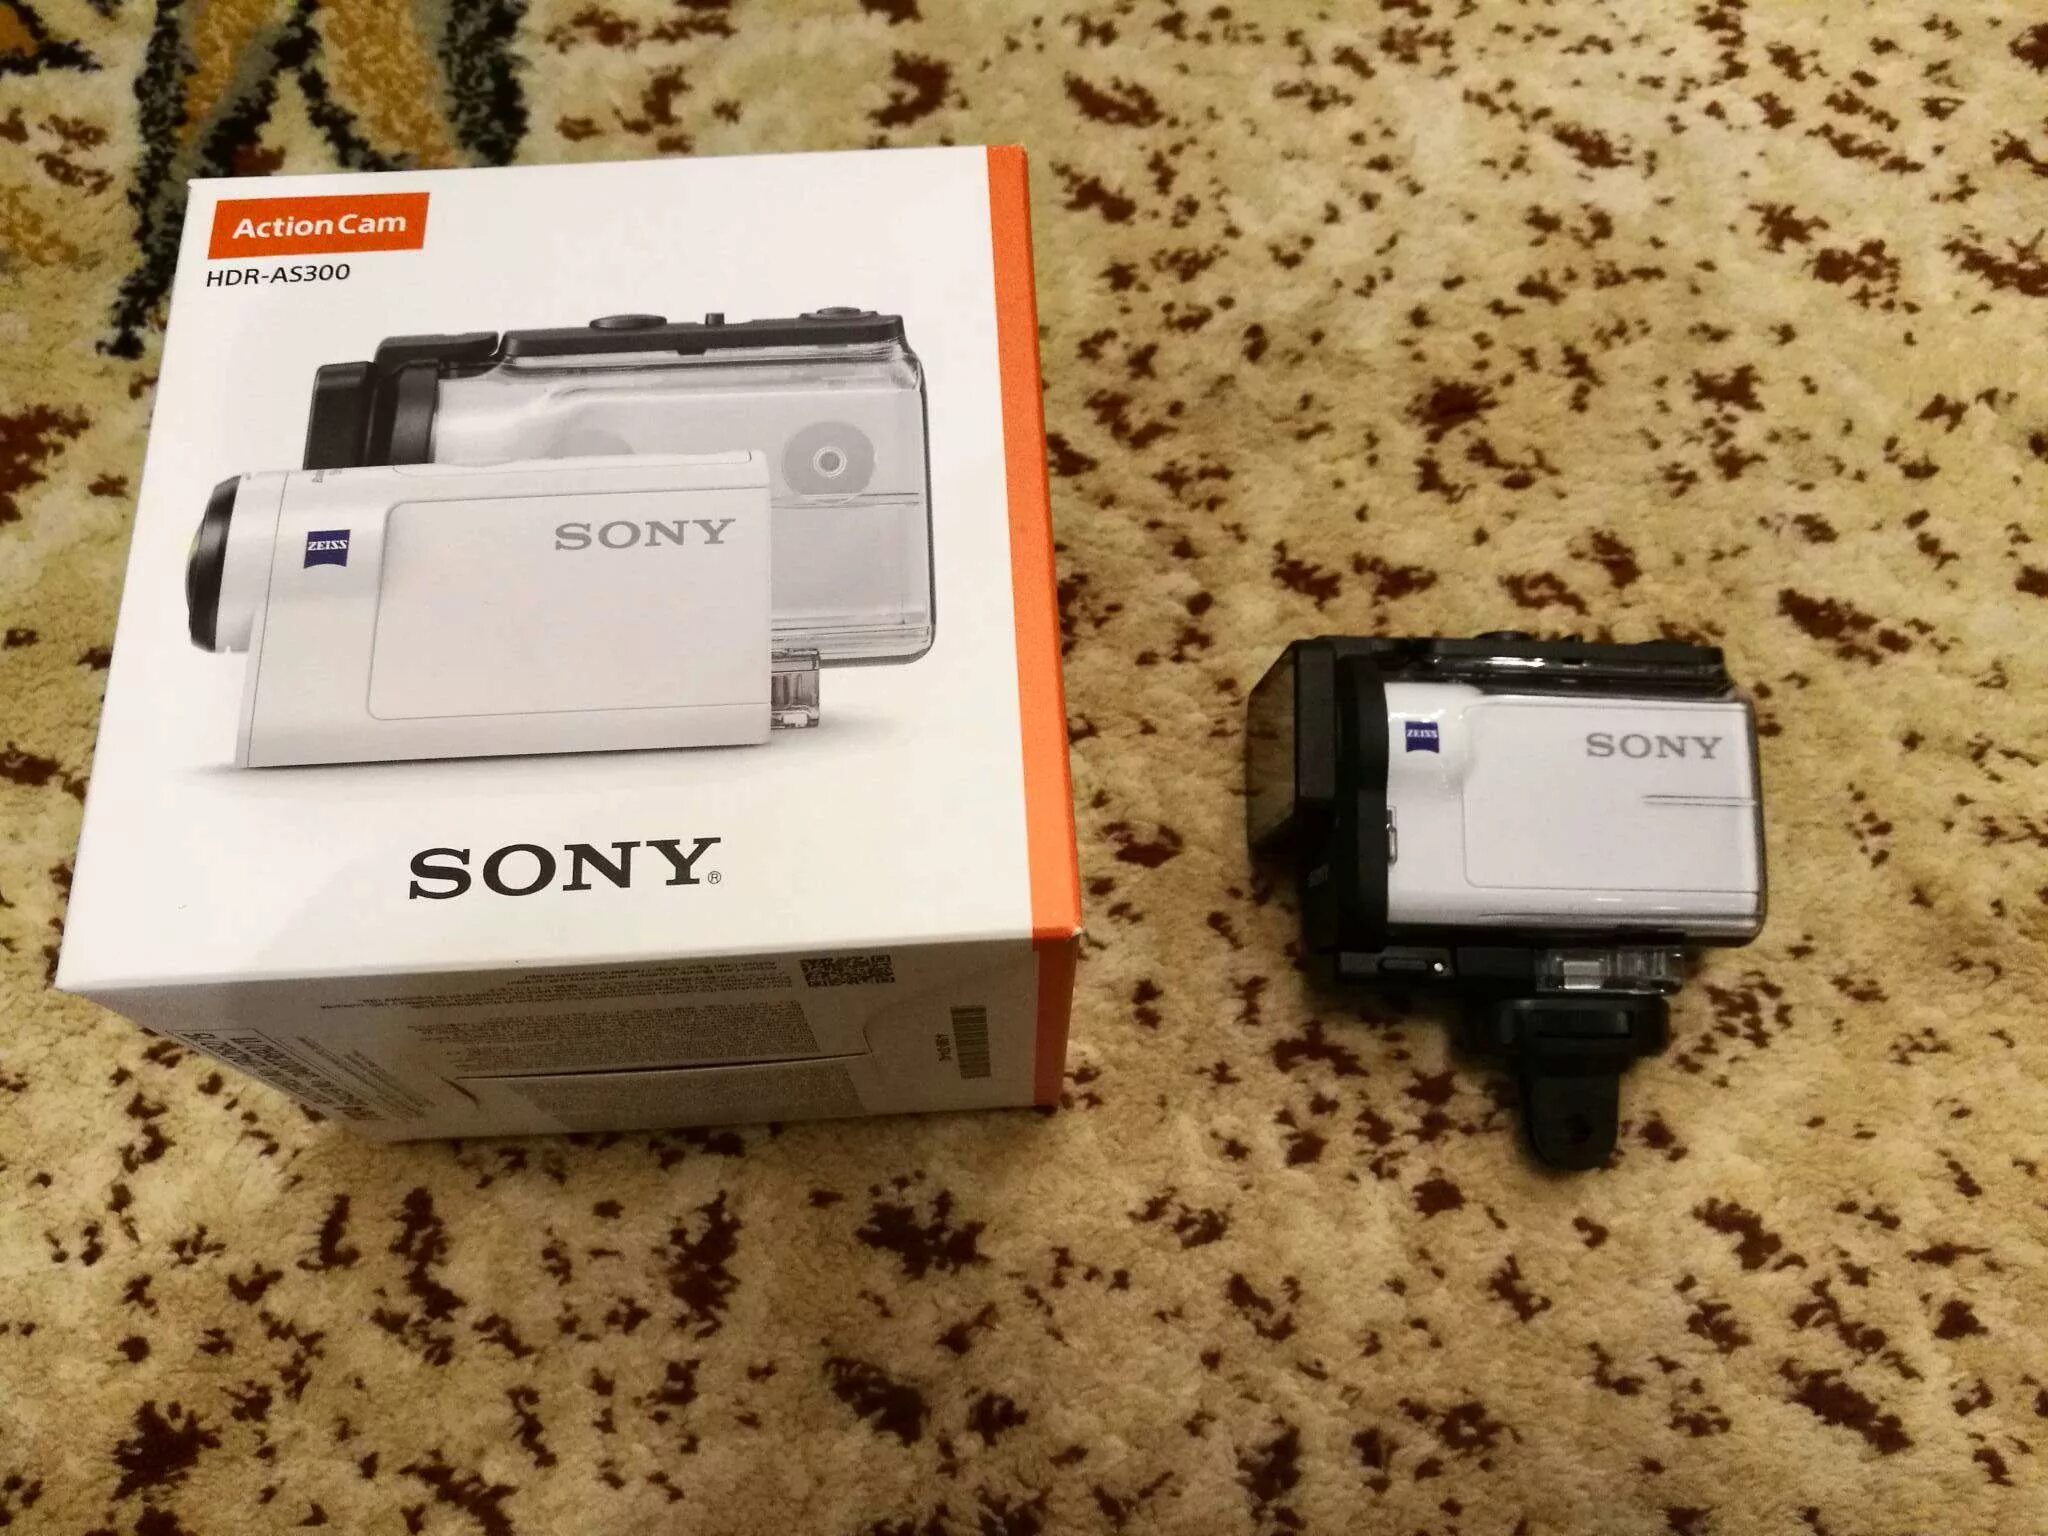 Sony HDR-as300. Камера сони АС 300. Видеокамера Sony HDR-as300. Экшен камера Sony HDR as 300. Сони ас 300